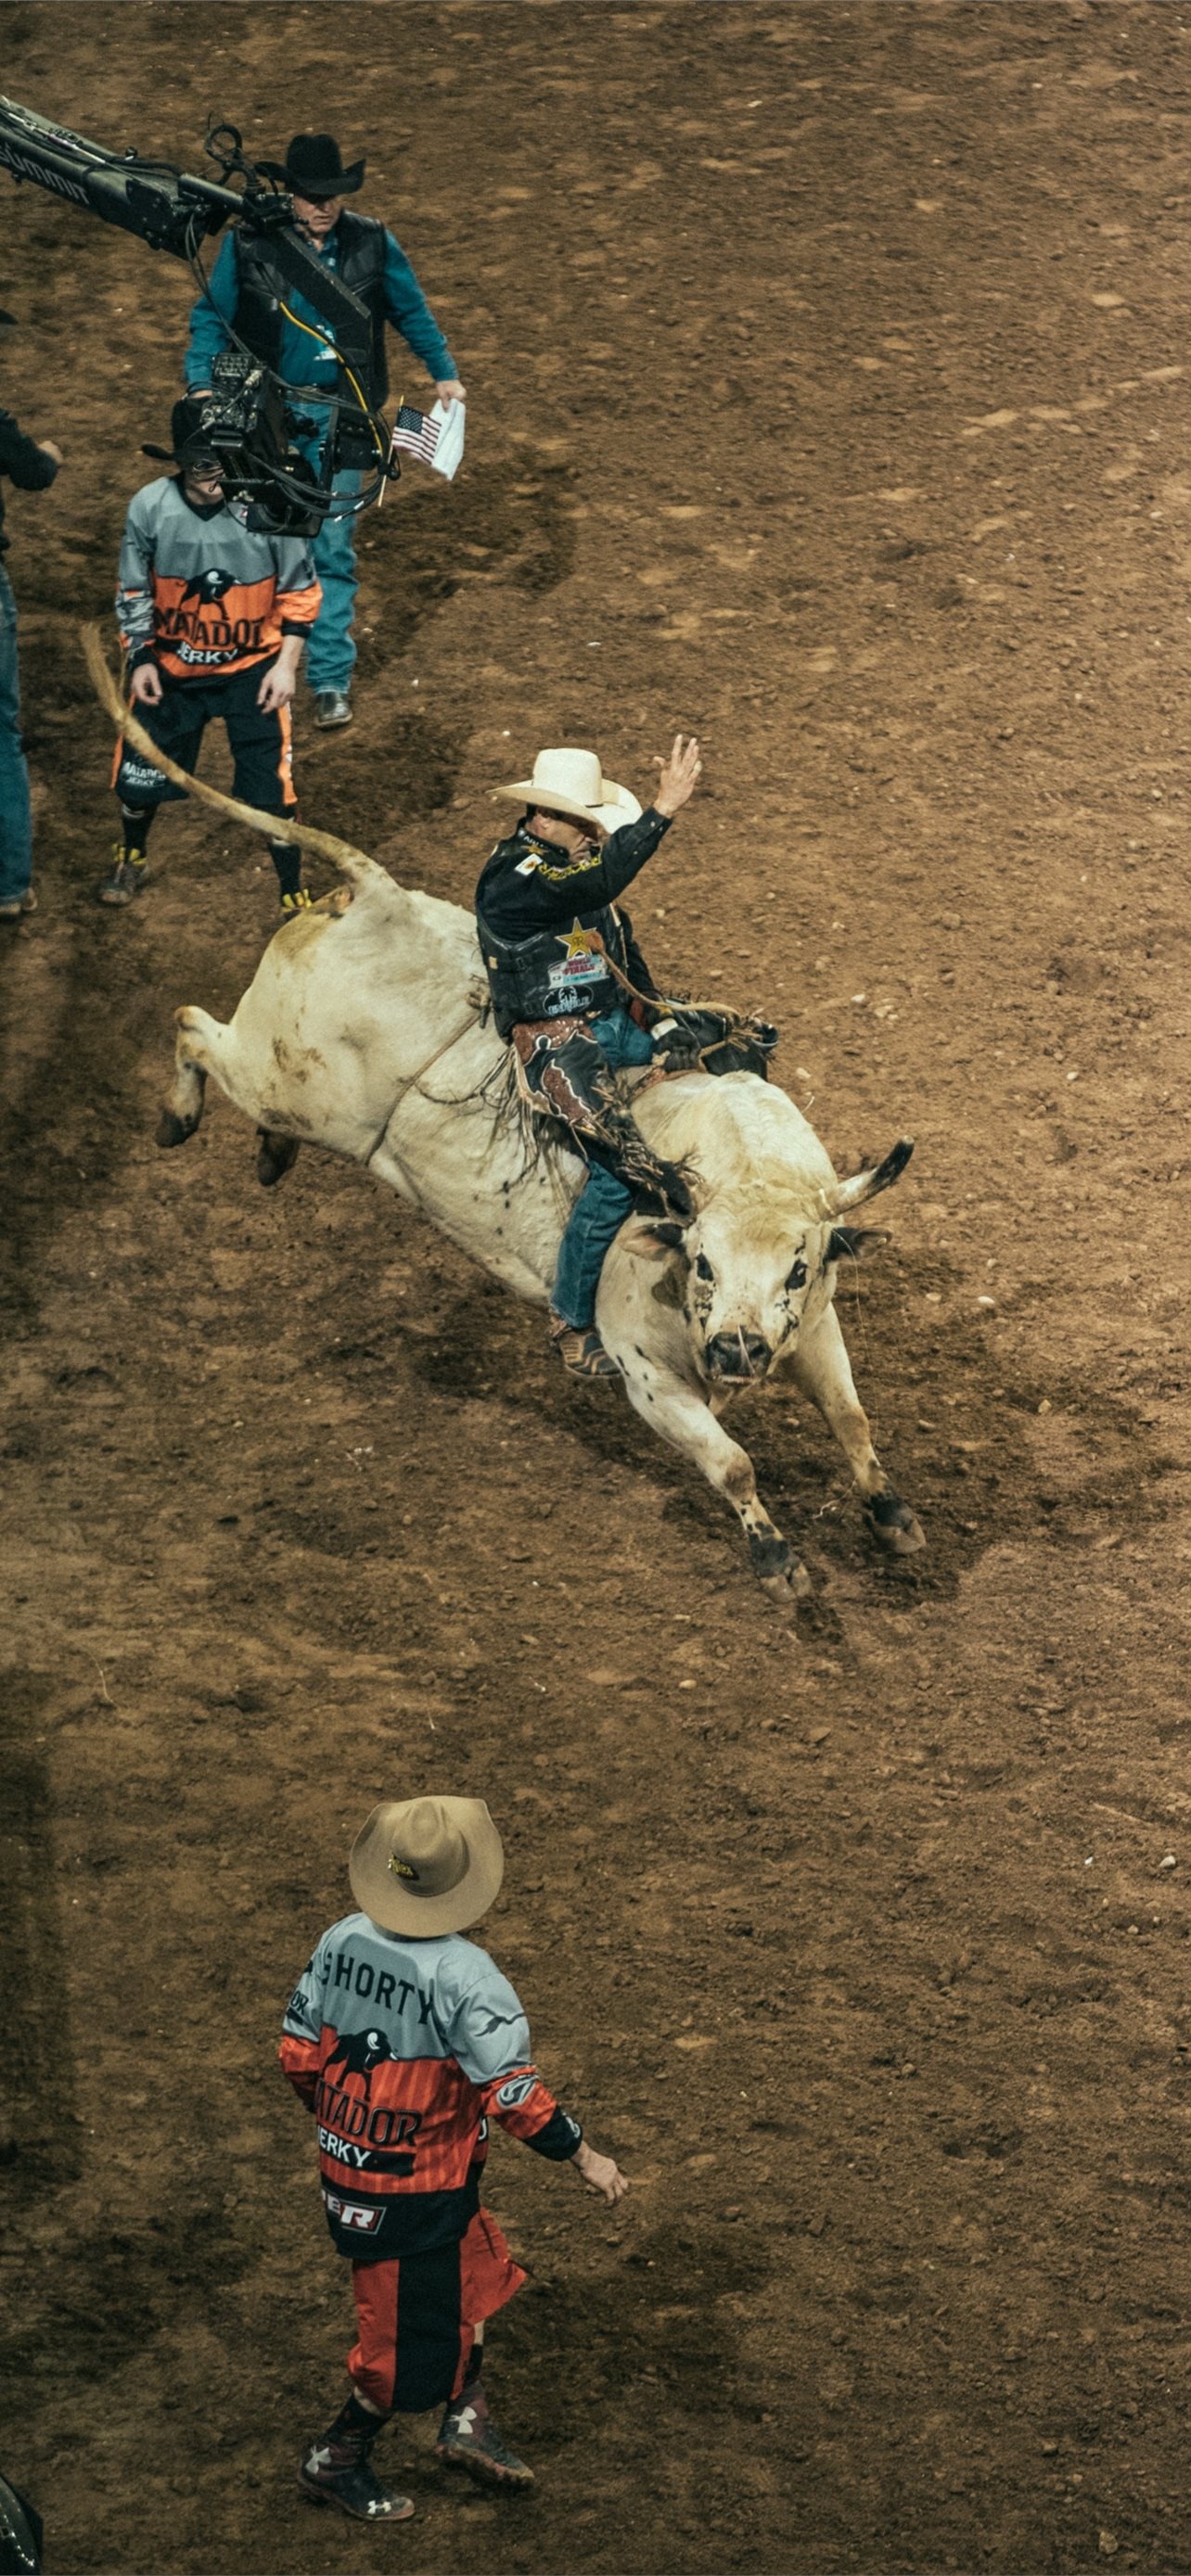 Bullriding: A sport where the rider must hang on with one hand for 8 seconds, A rodeo challenge. 1290x2780 HD Background.